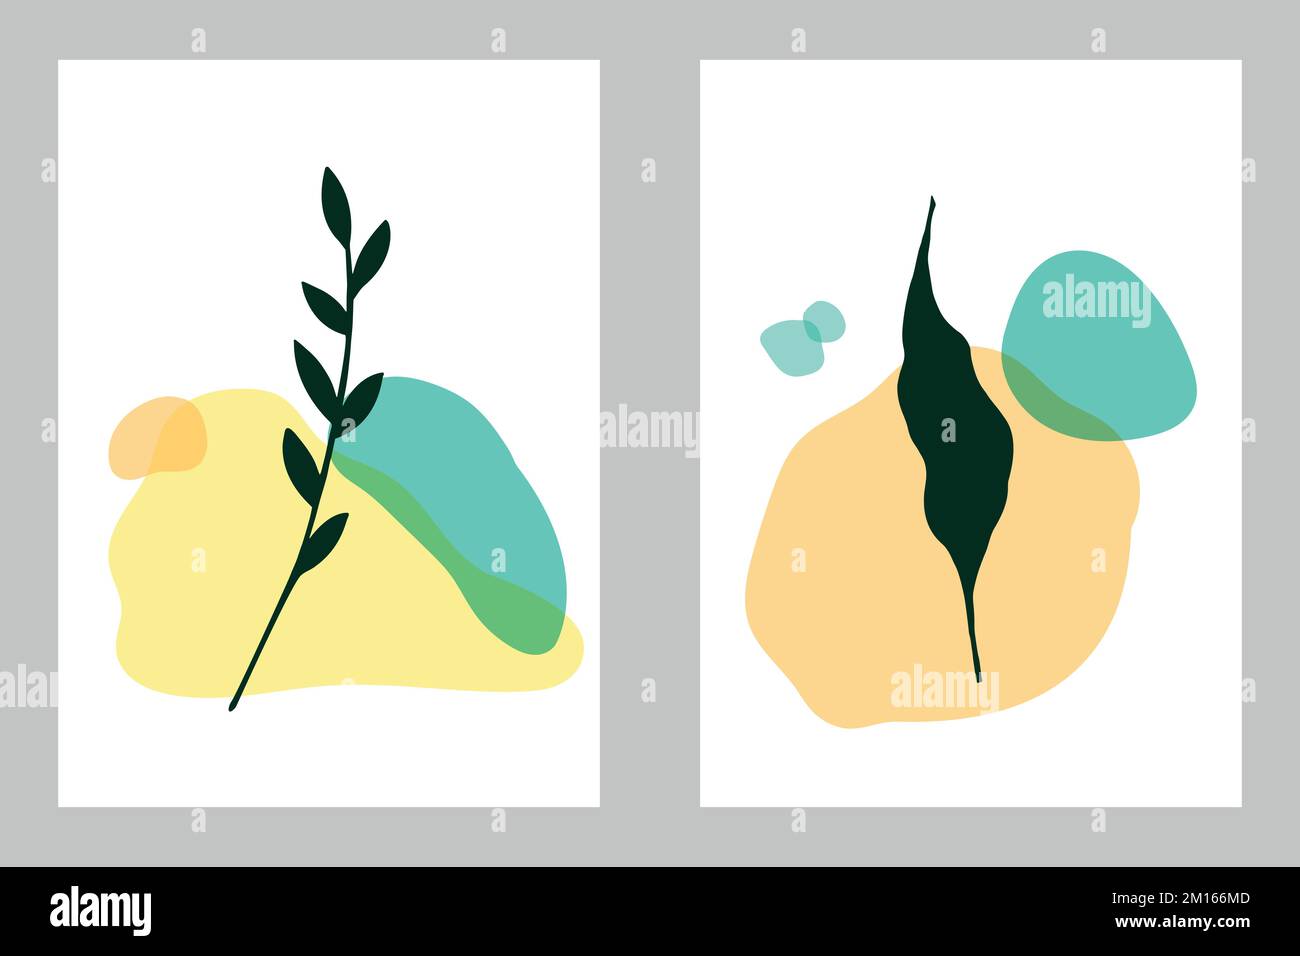 Abstract background with plants and hand drawn shapes. Hand drawn botanical elements. Vector art Stock Vector